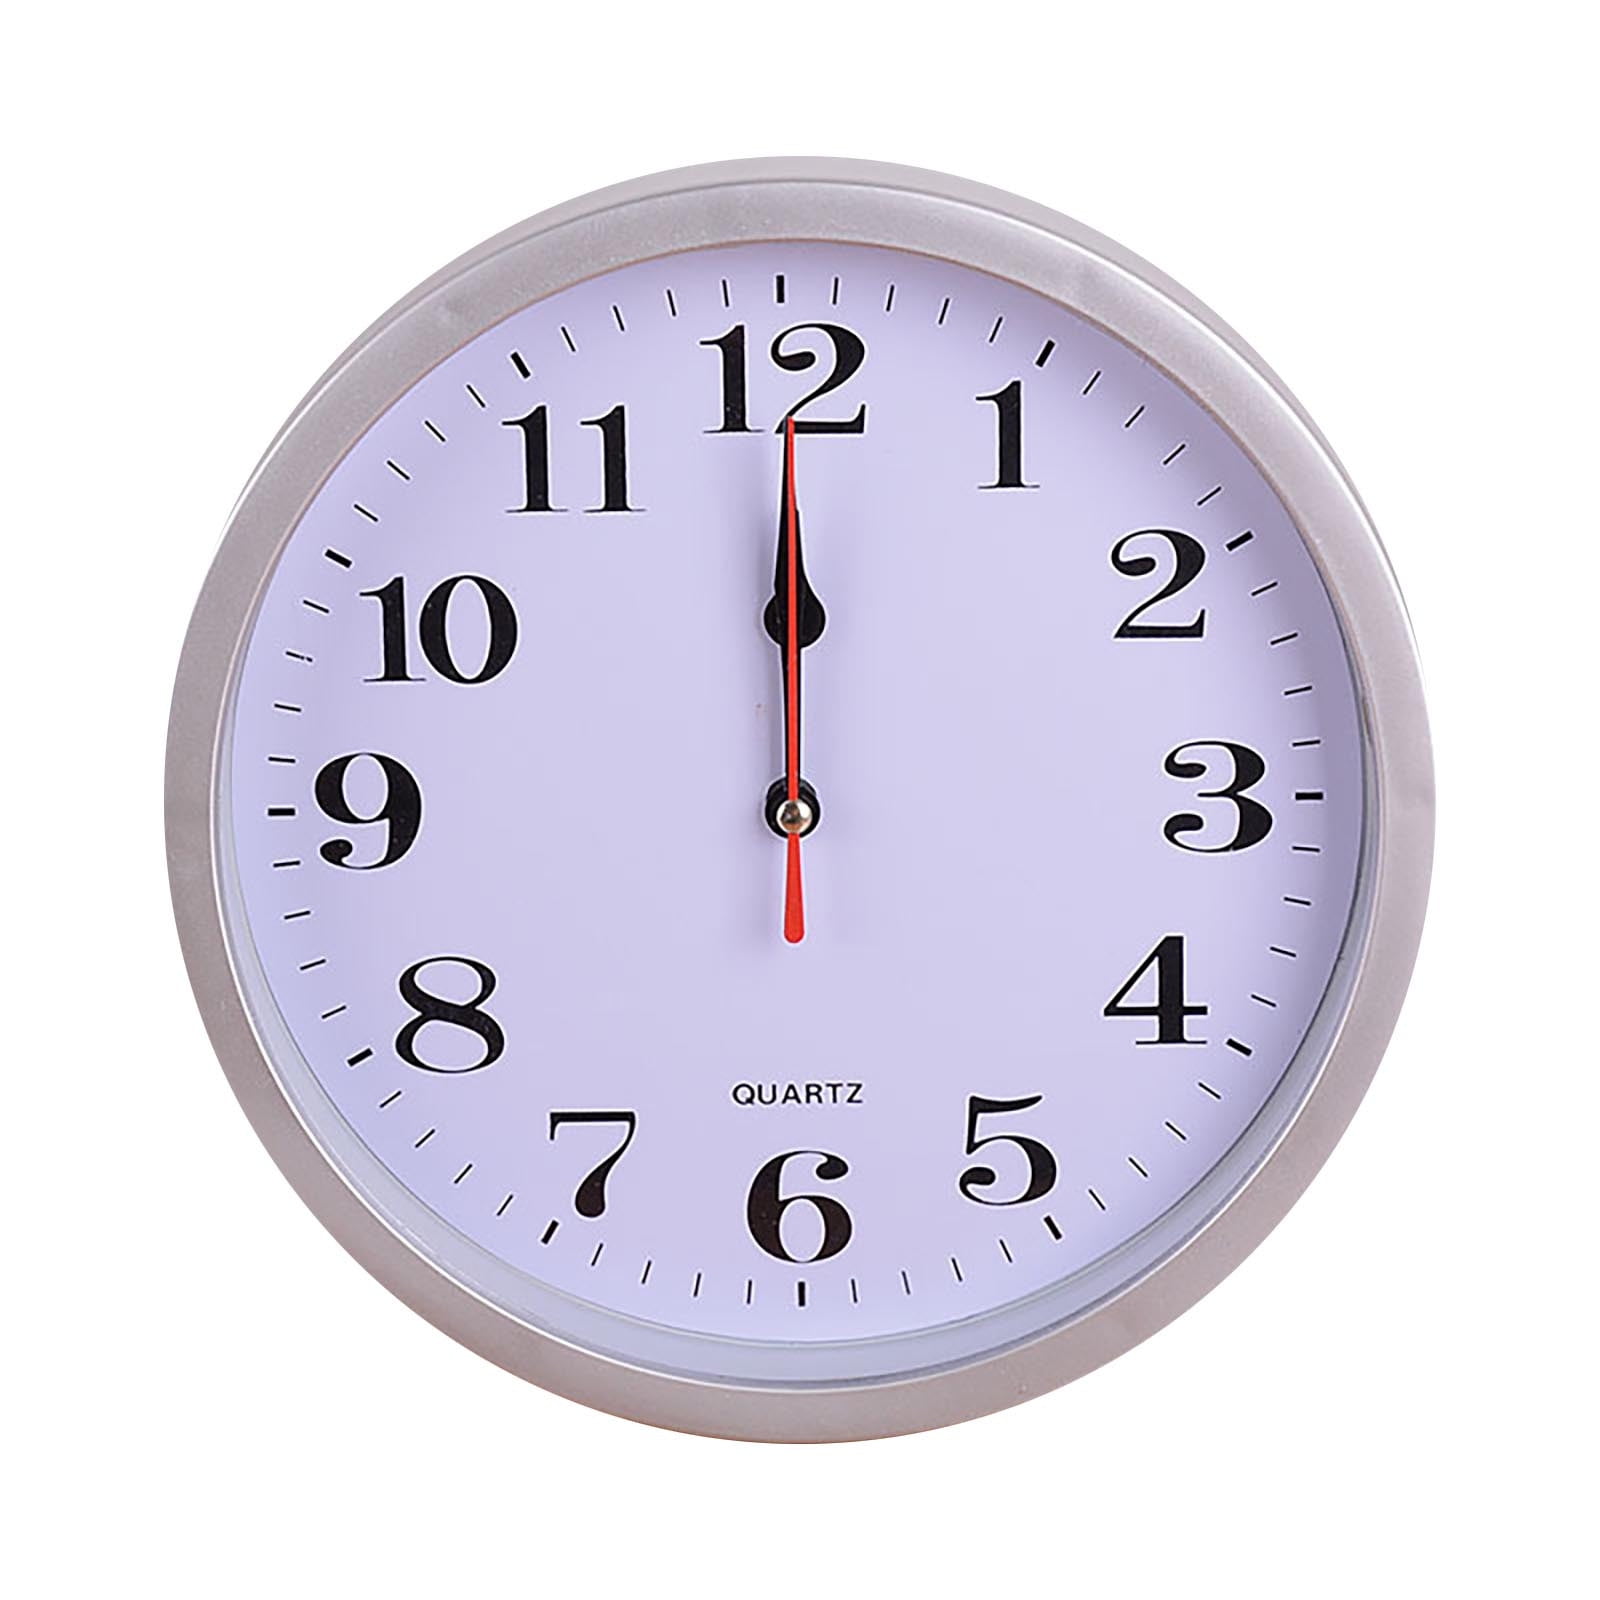 Gyedtr 9inch Wall Clock White Kitchen Clocks Battery Operated Small Silent Non Ticking ABS Decorative Bathroom Living Room Office Bedroom Clearance 1dcce22e 1ef9 49aa A188 24e497225bb8.552606fba04509fee626a2e9b84f62cb 